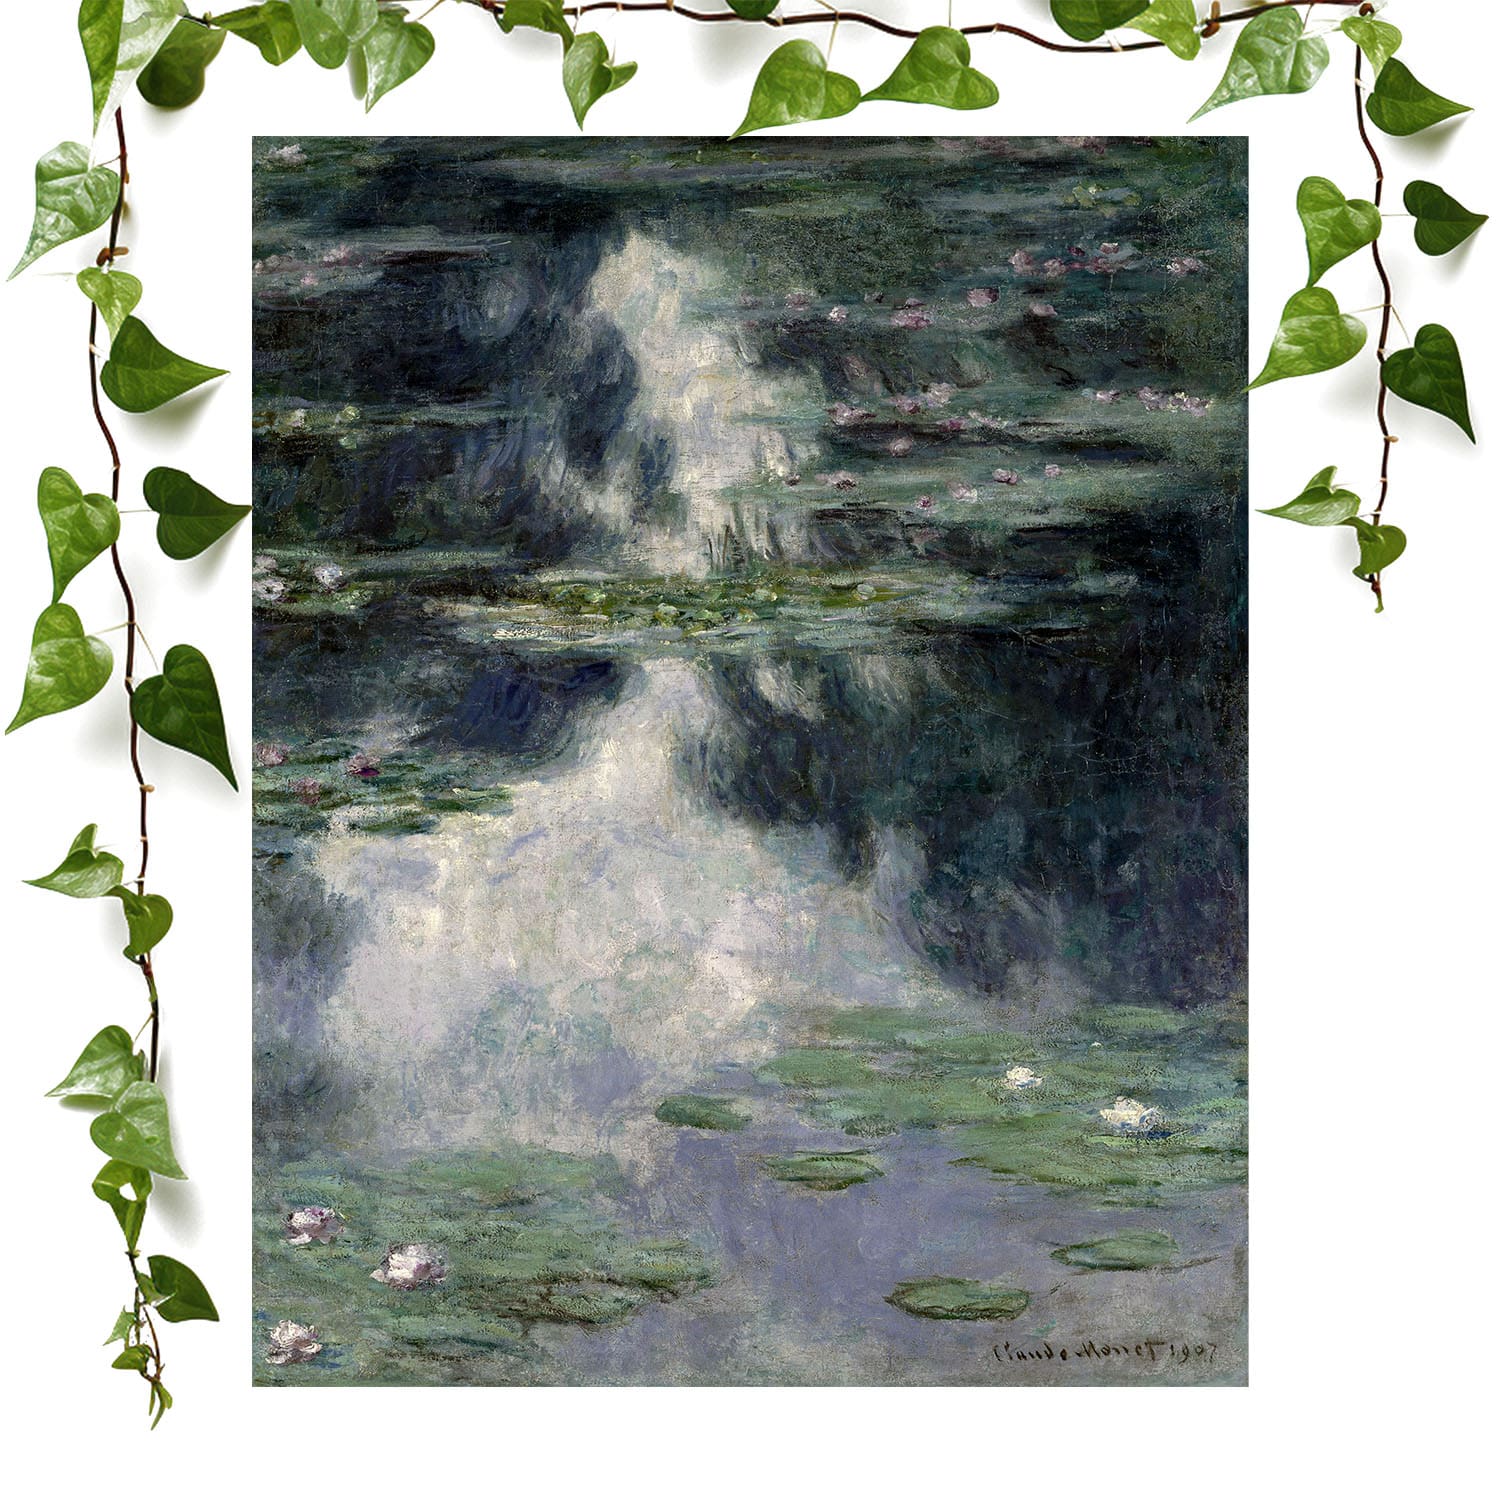 Tranquility art print monet lillies painting vintage wall art